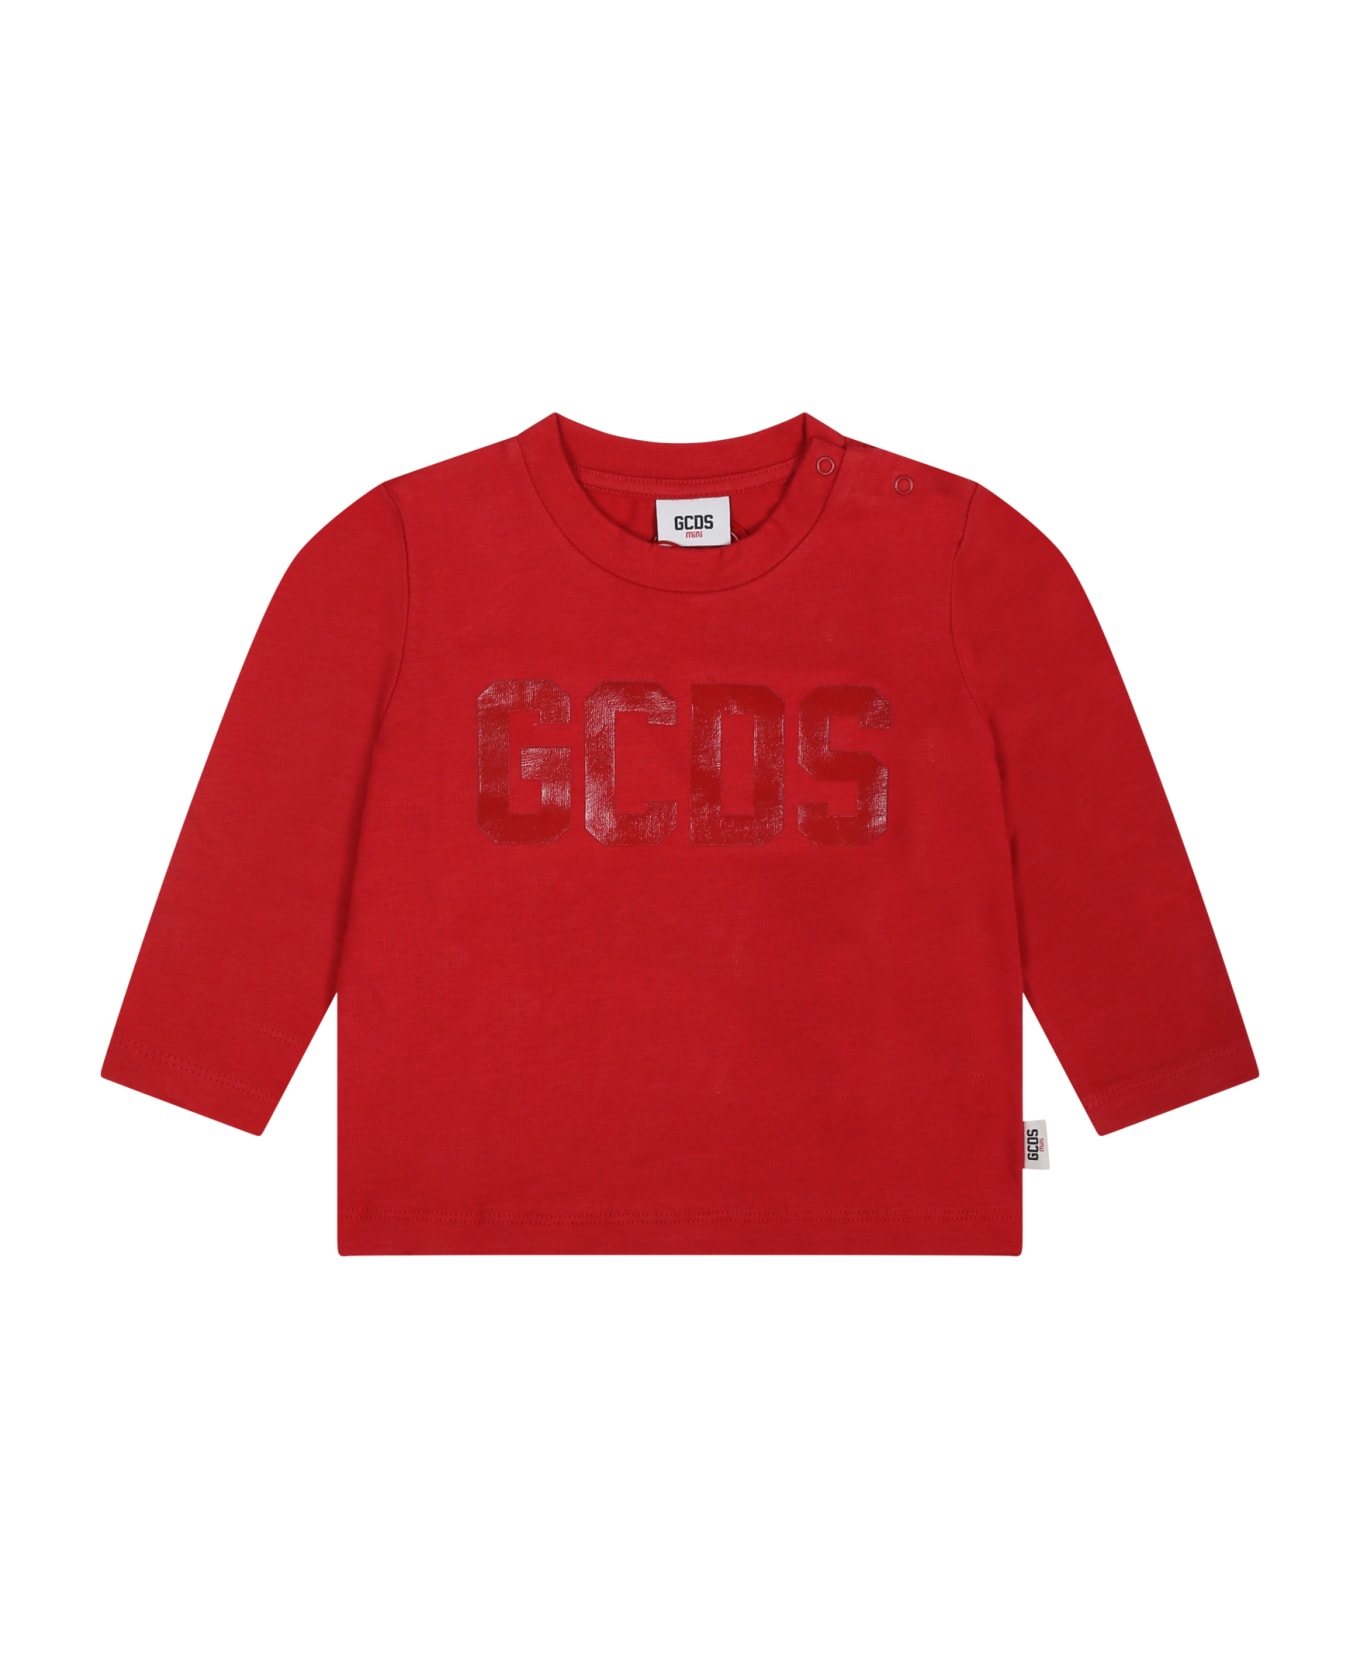 GCDS Mini Red T-shirt For Baby Boy With Logo - Red